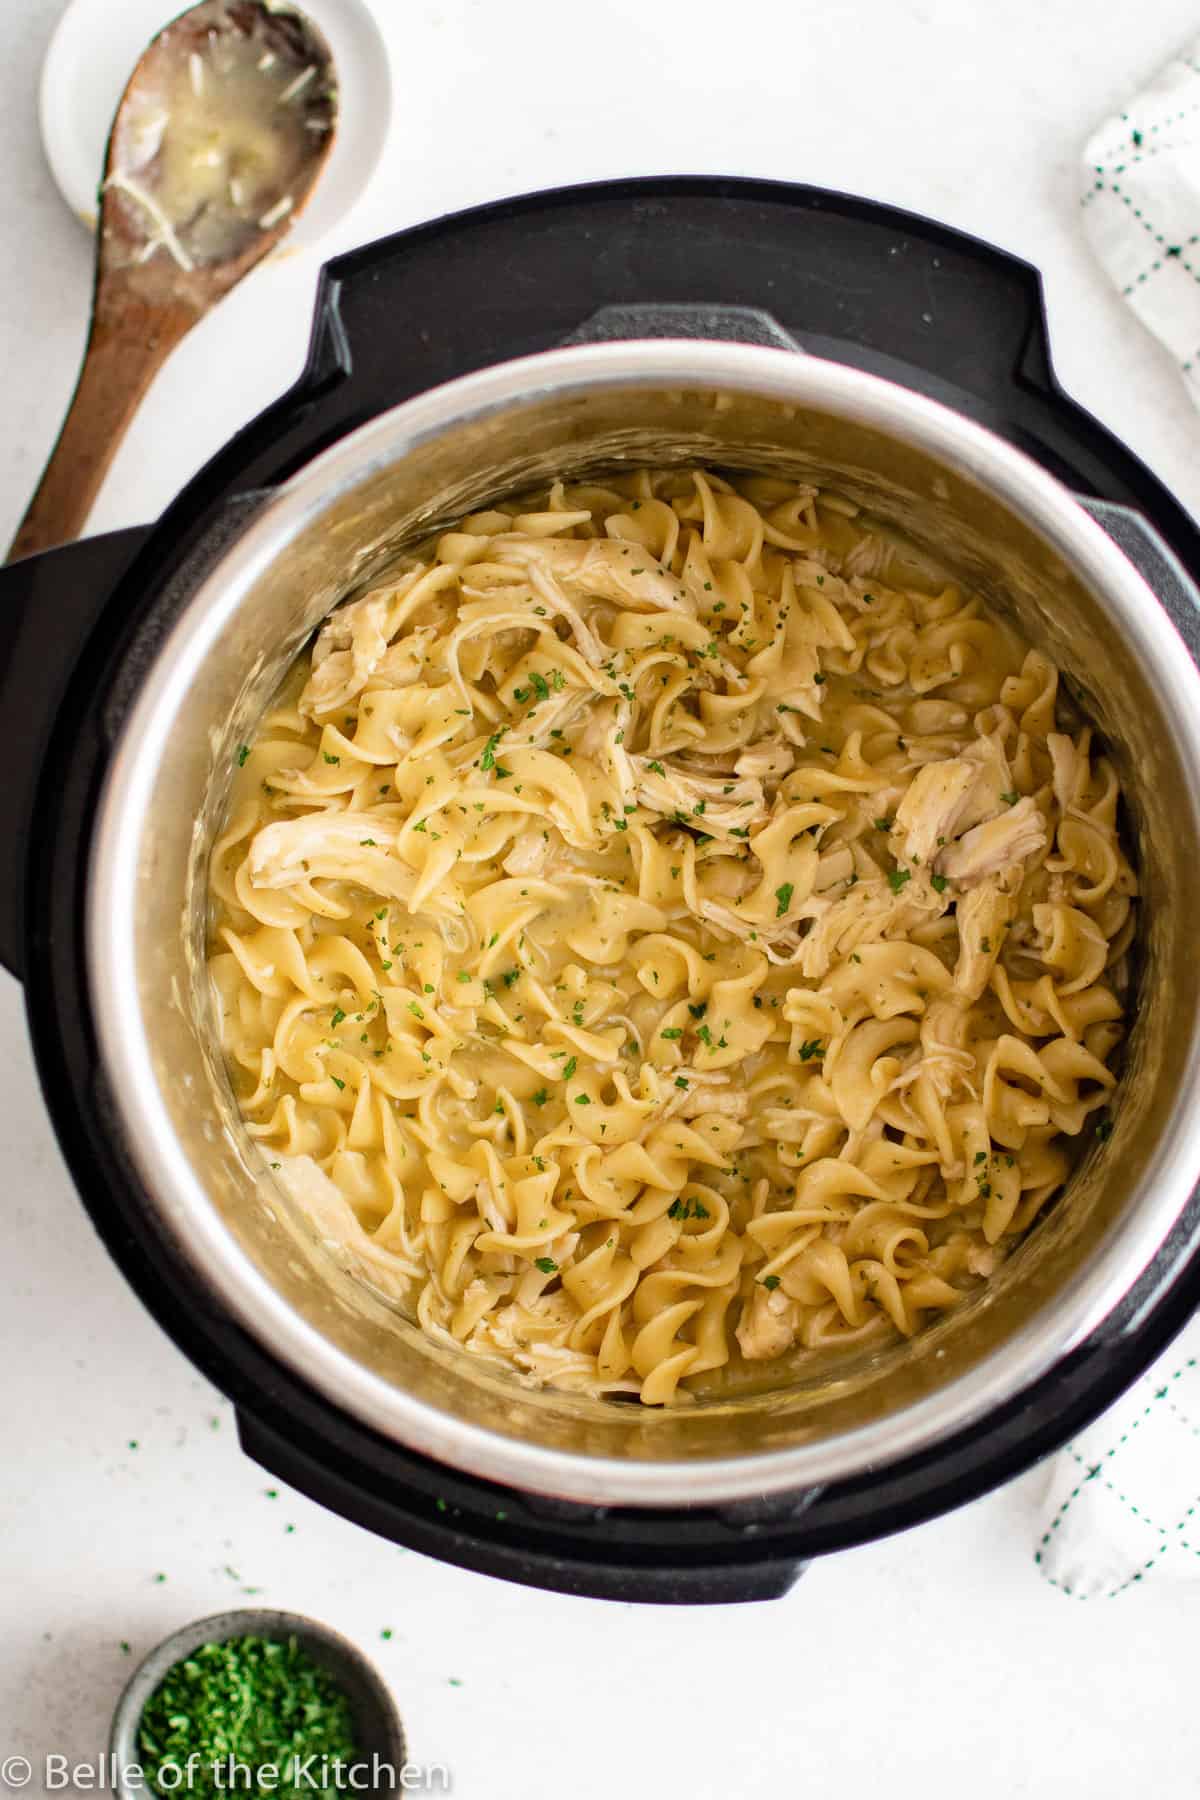 an Instant Pot full of chicken and noodles next to wooden spoon.